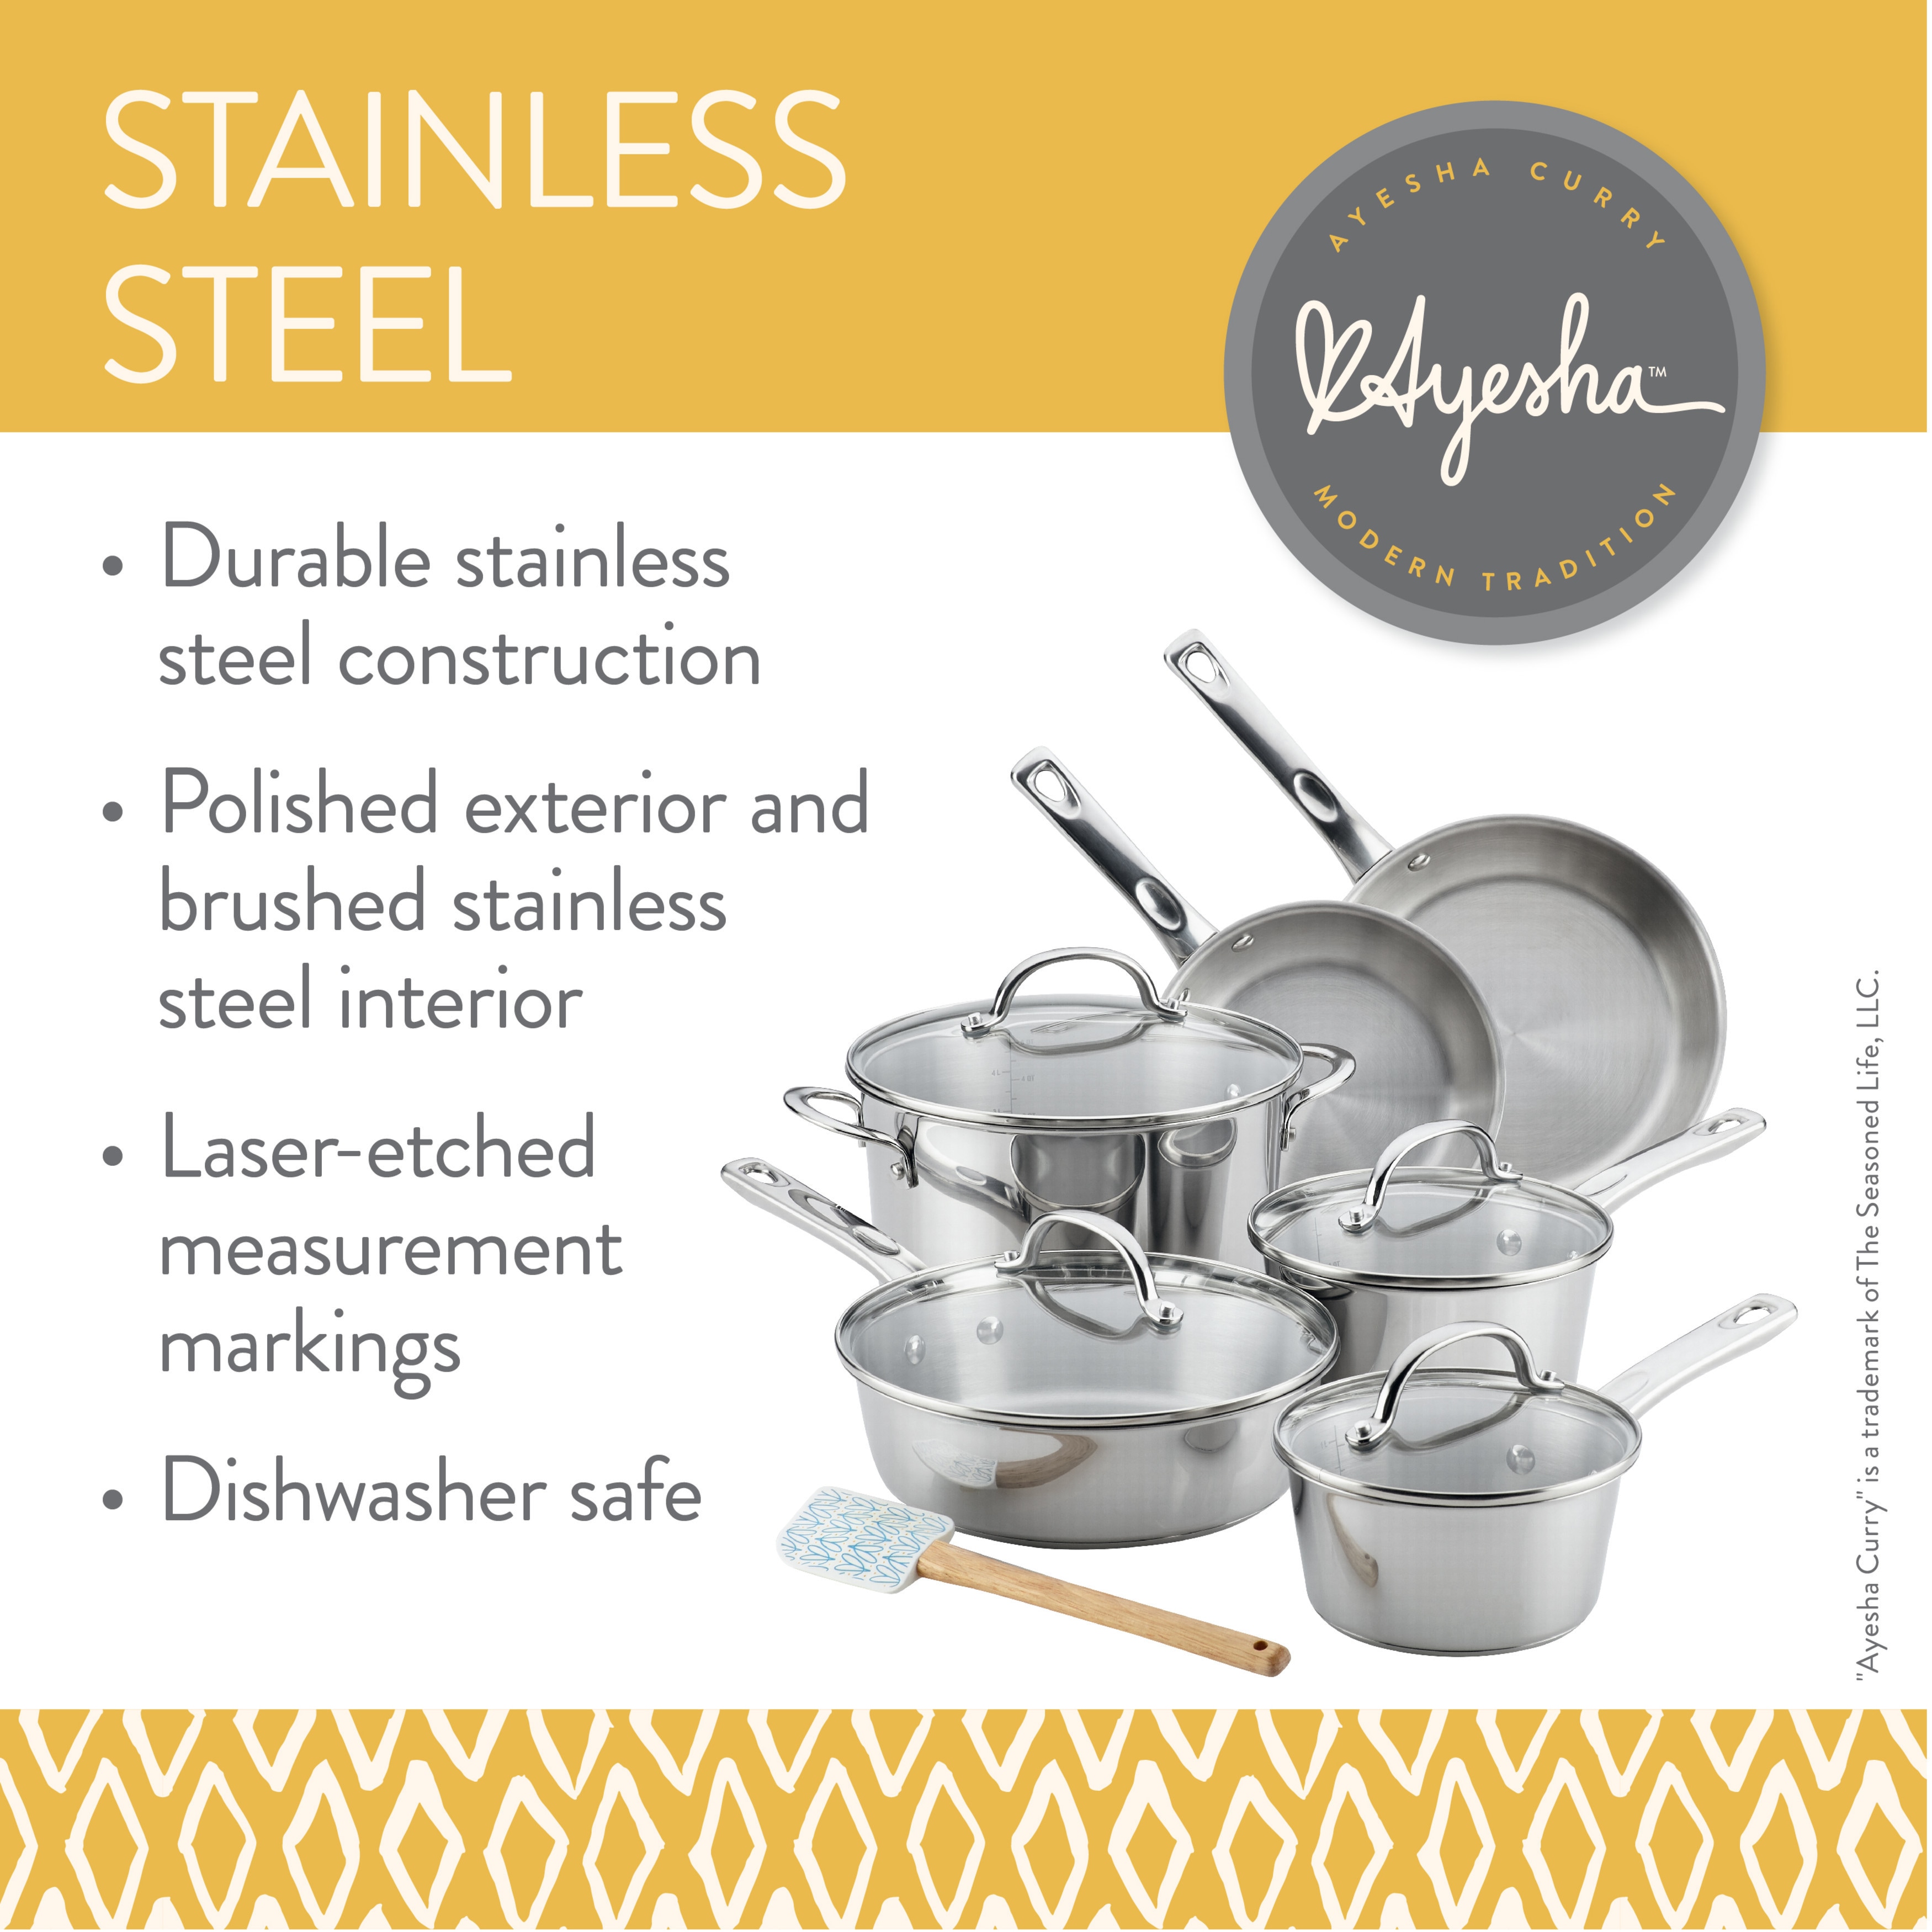 https://ak1.ostkcdn.com/images/products/19978199/Ayesha-Curry-Home-Collection-Stainless-Steel-Cookware-Set-11-Piece-5f1bbc63-5348-4cdd-aa40-0d2b2e5d84e5.jpg